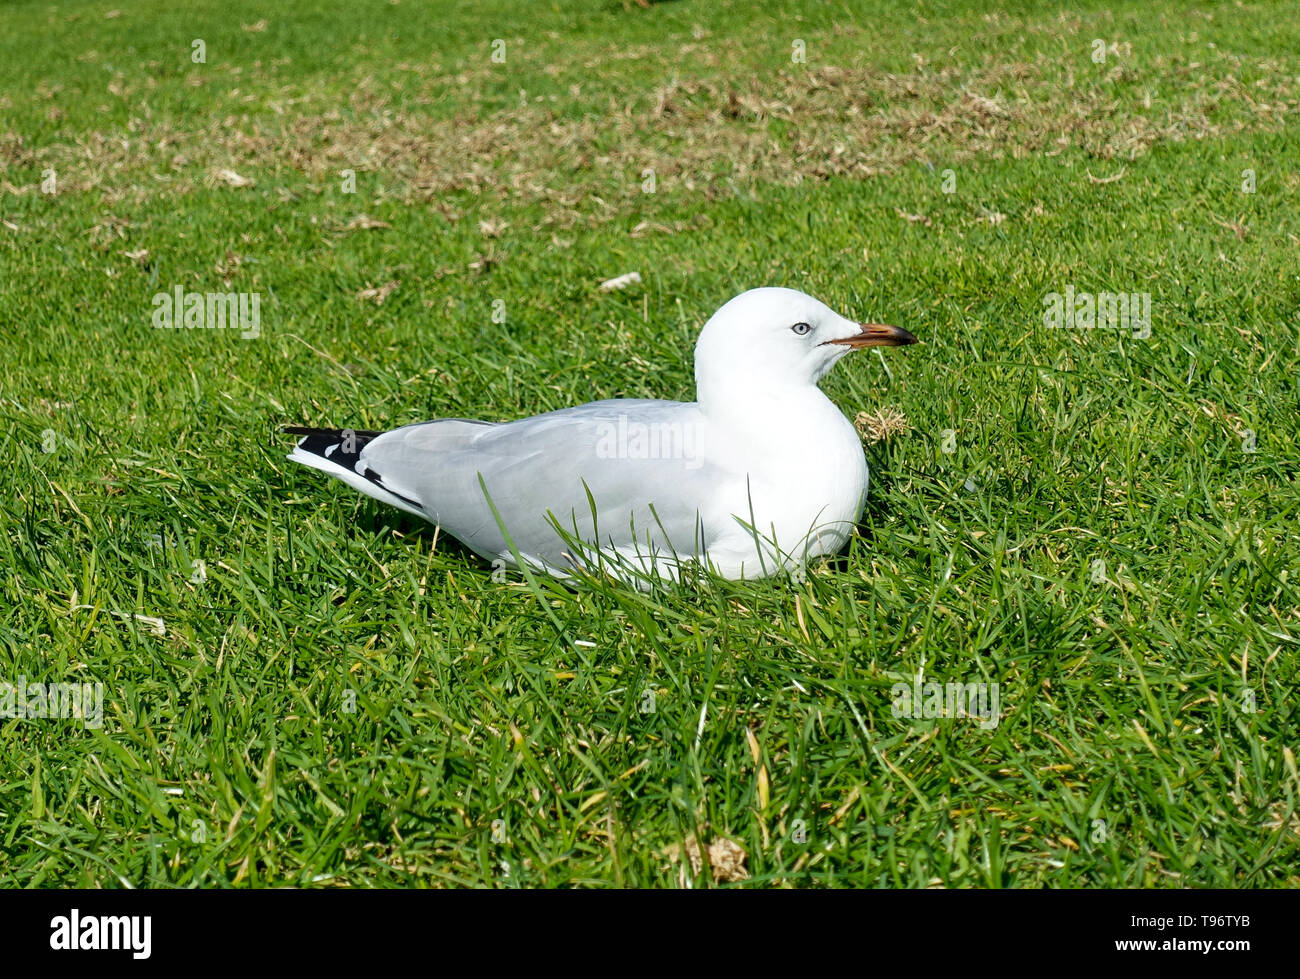 Seagull resting on lawned area at Lorne Beach, Australia Stock Photo